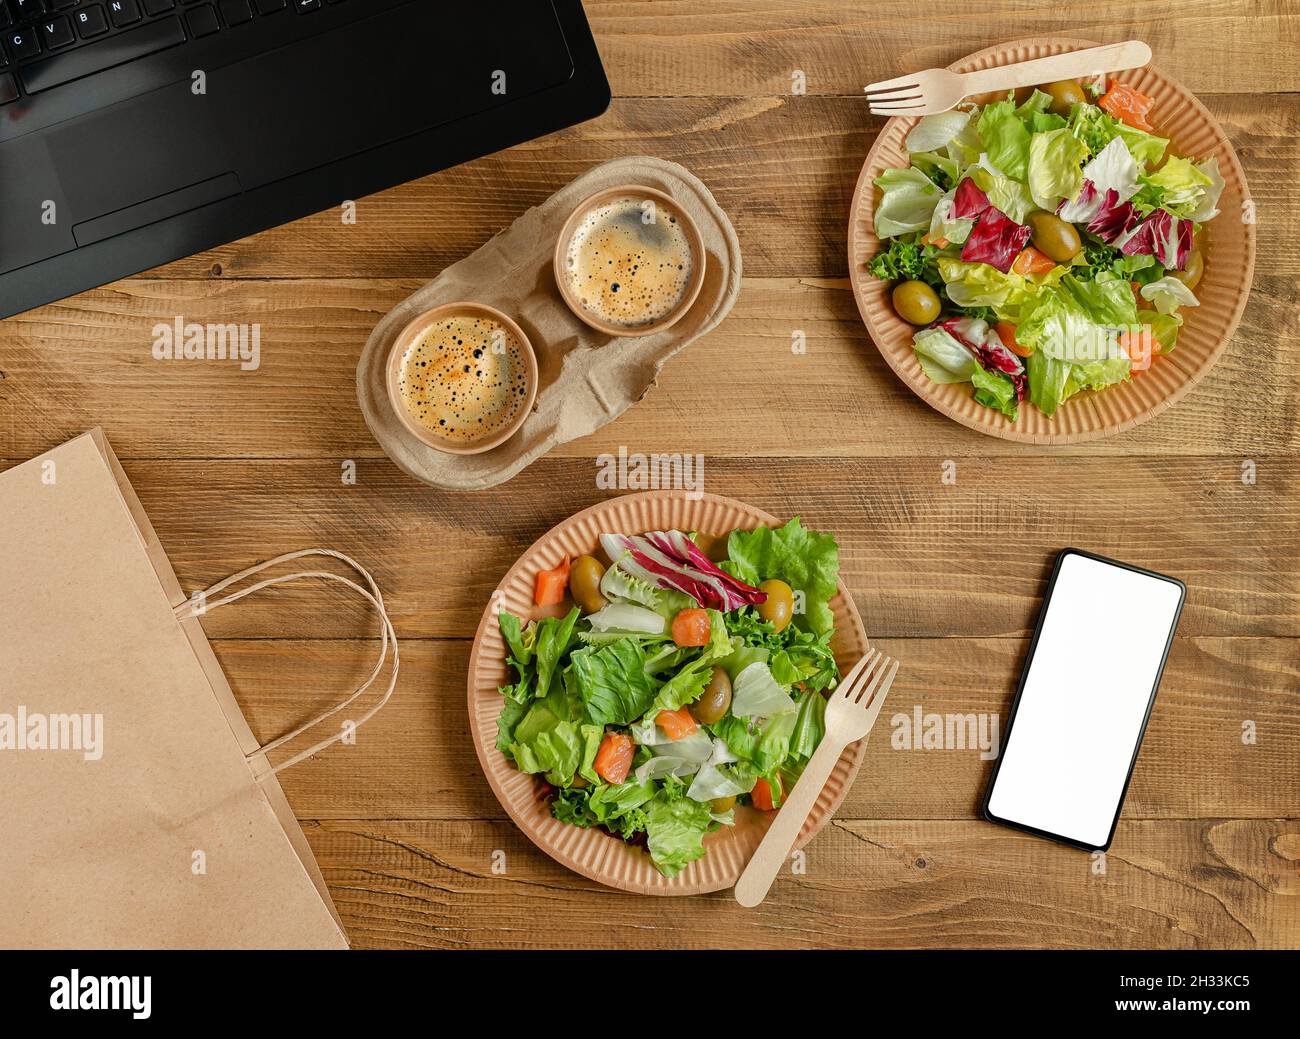 Online food delivery in disposable tableware with white blank smartphone screen. Stock Photo